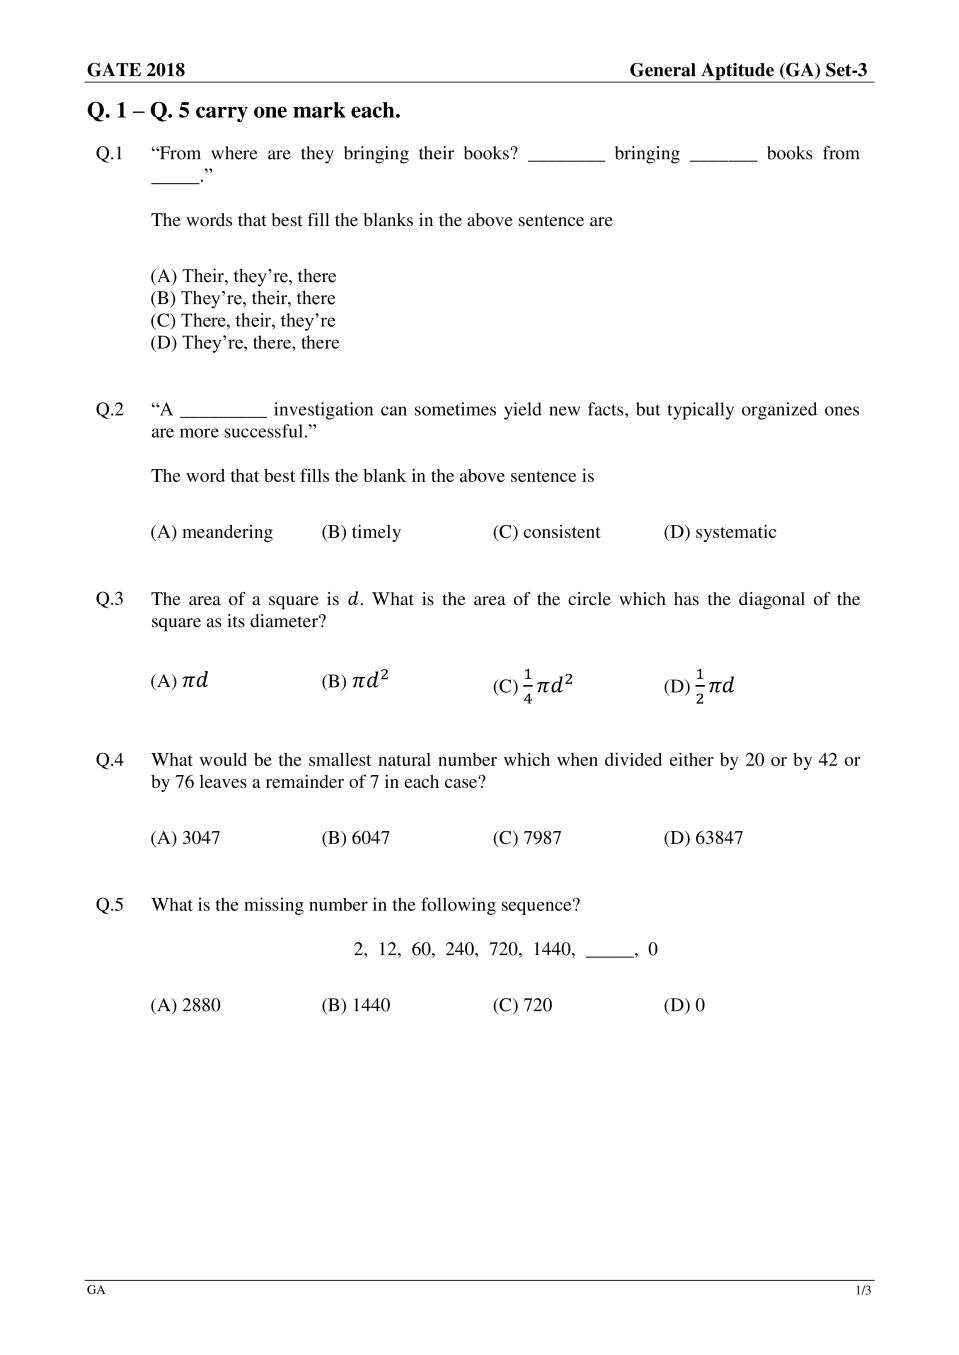 GATE 2018 Mining Engineering (MN) Question Paper with Answer - Page 1